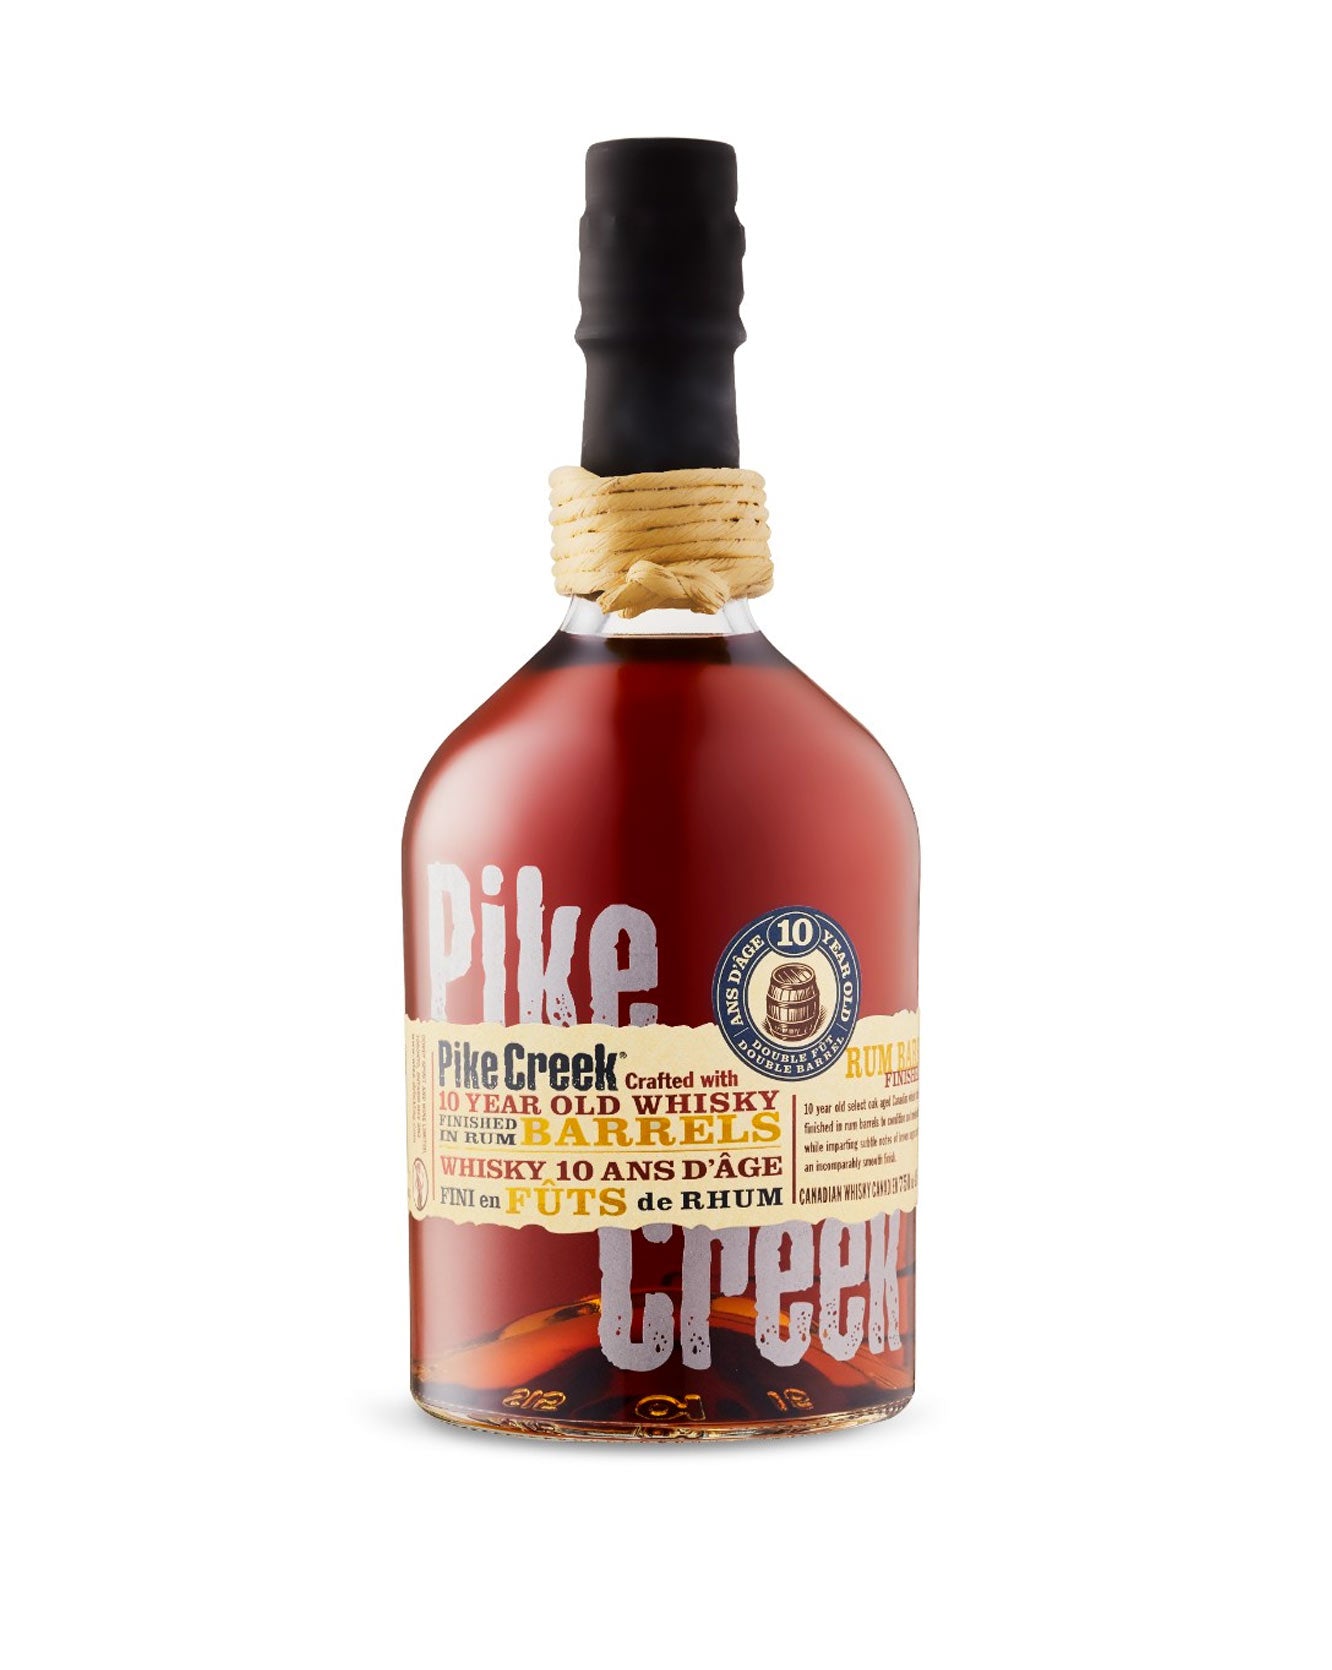 Pike Creek 10 Year Old Whisky